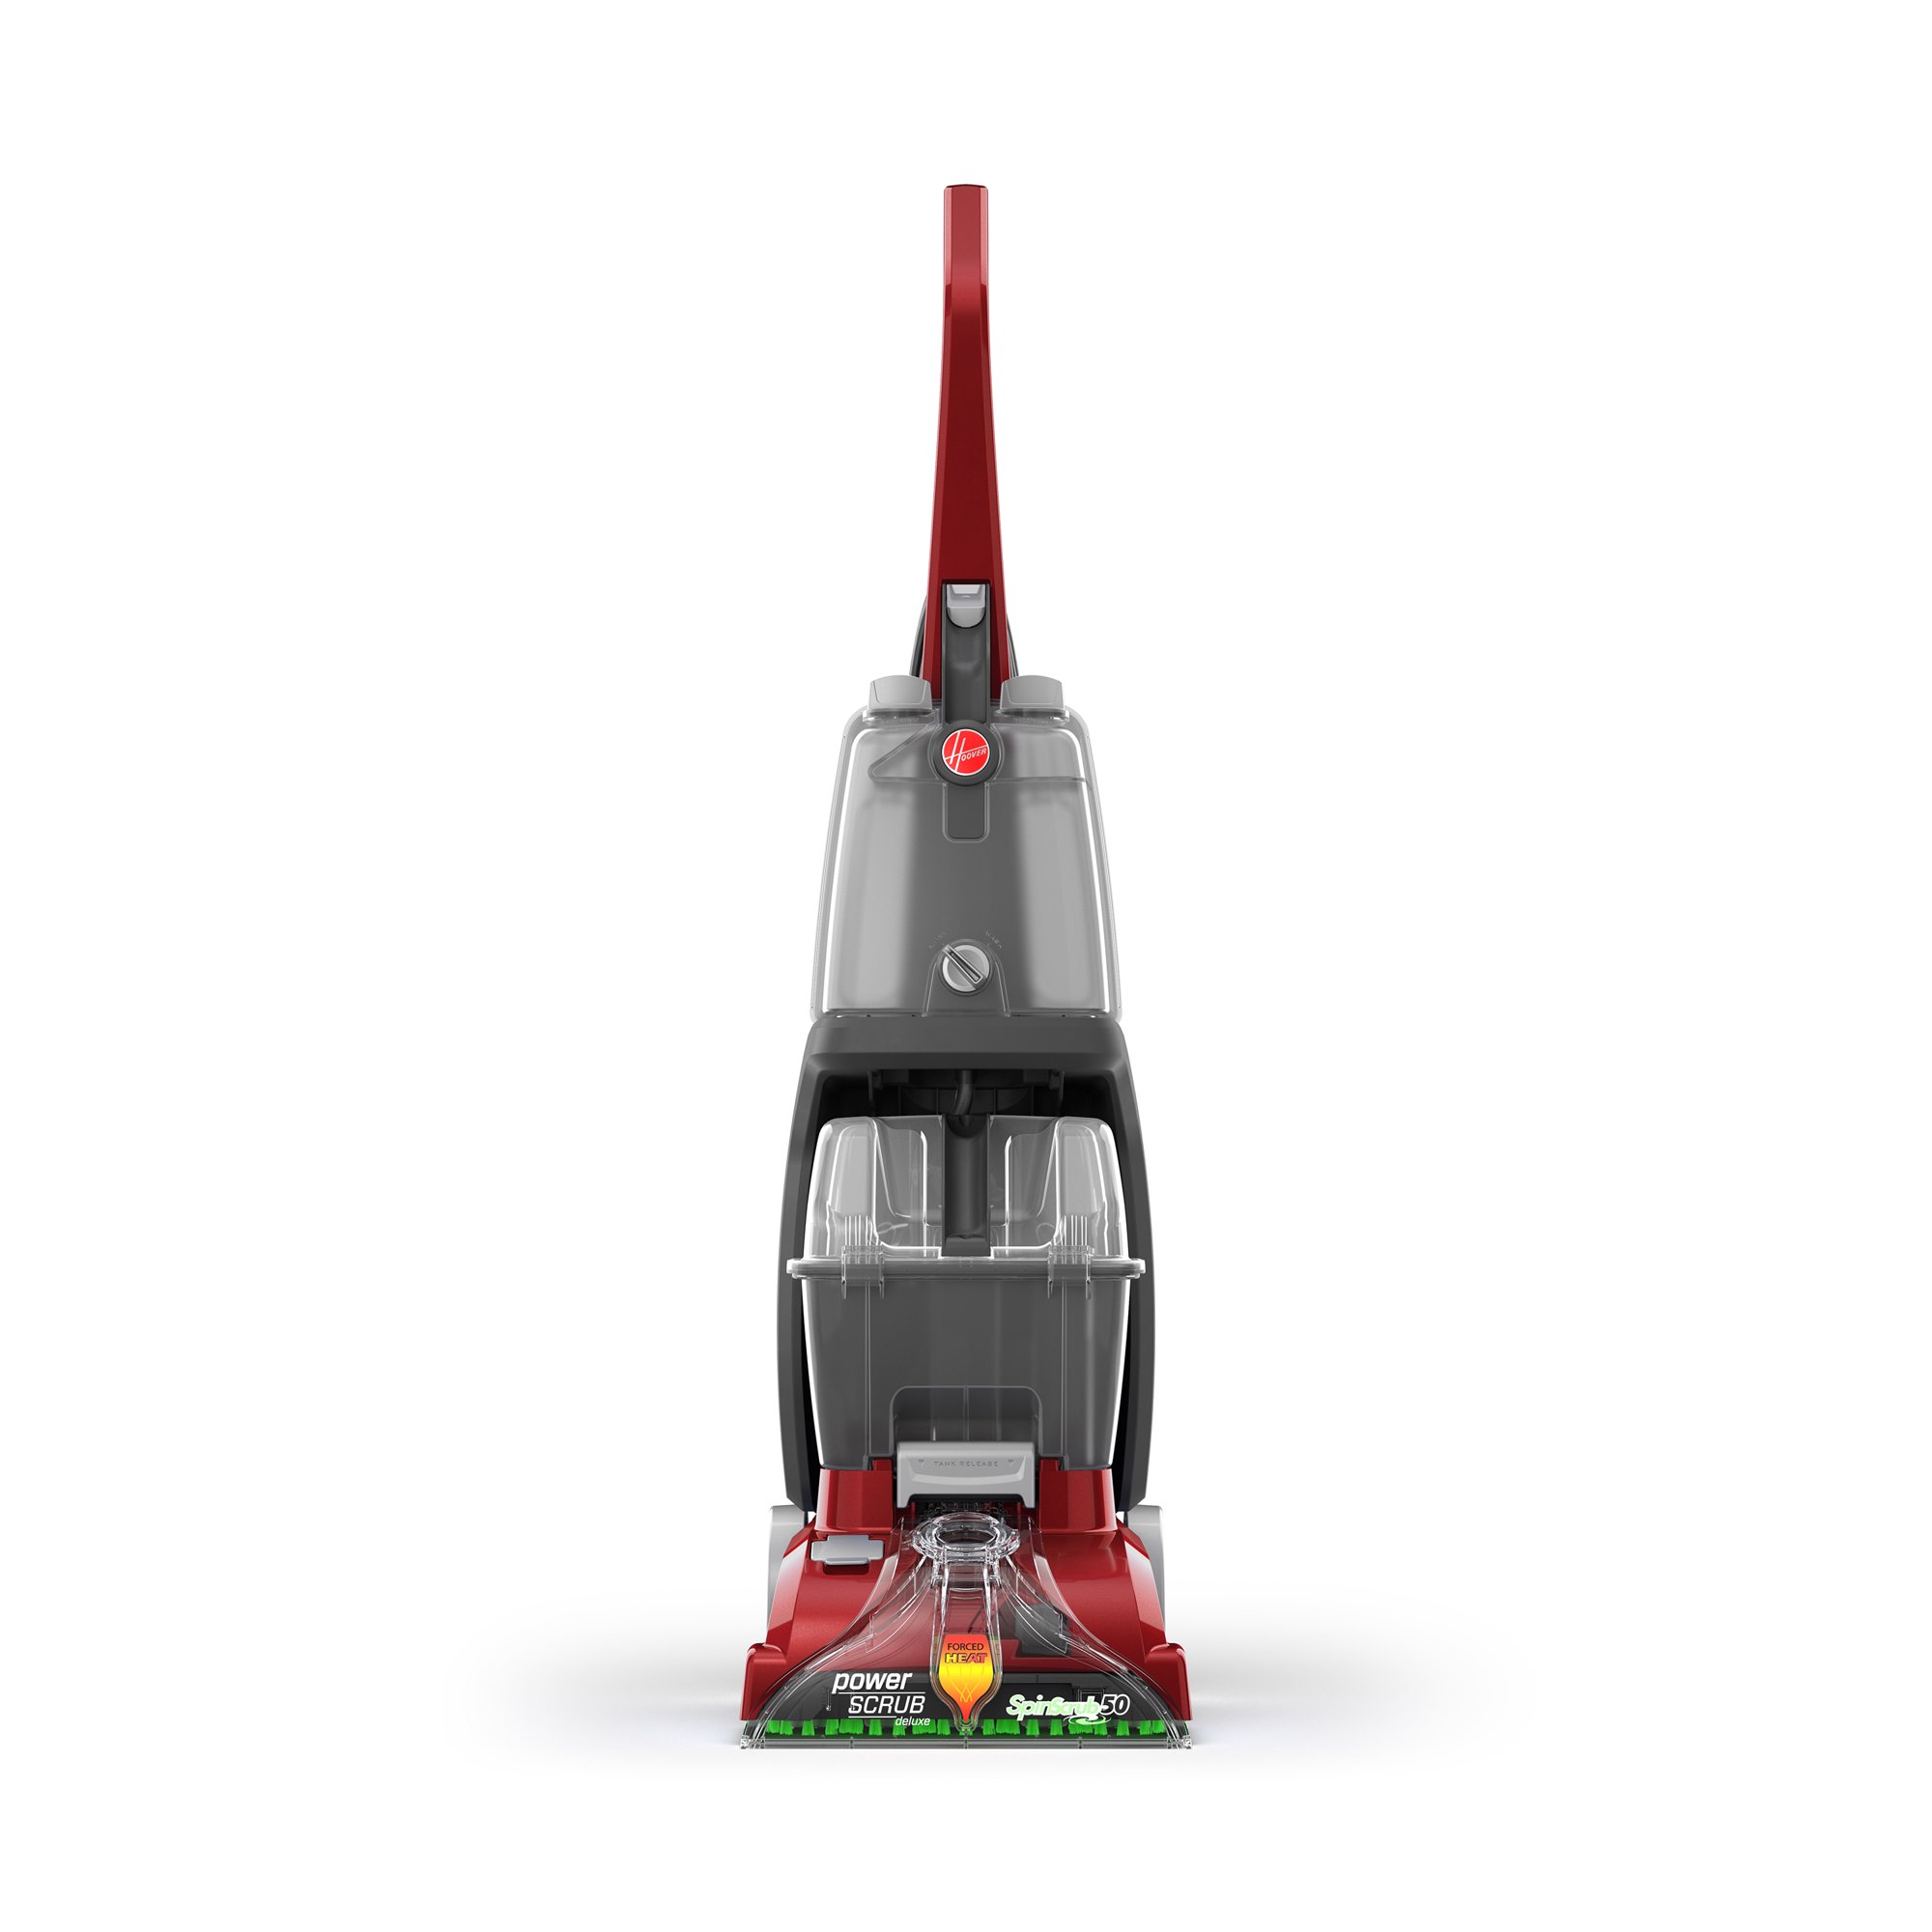 Hoover Power Scrub Deluxe Carpet Cleaner Machine $119 + Free Shipping